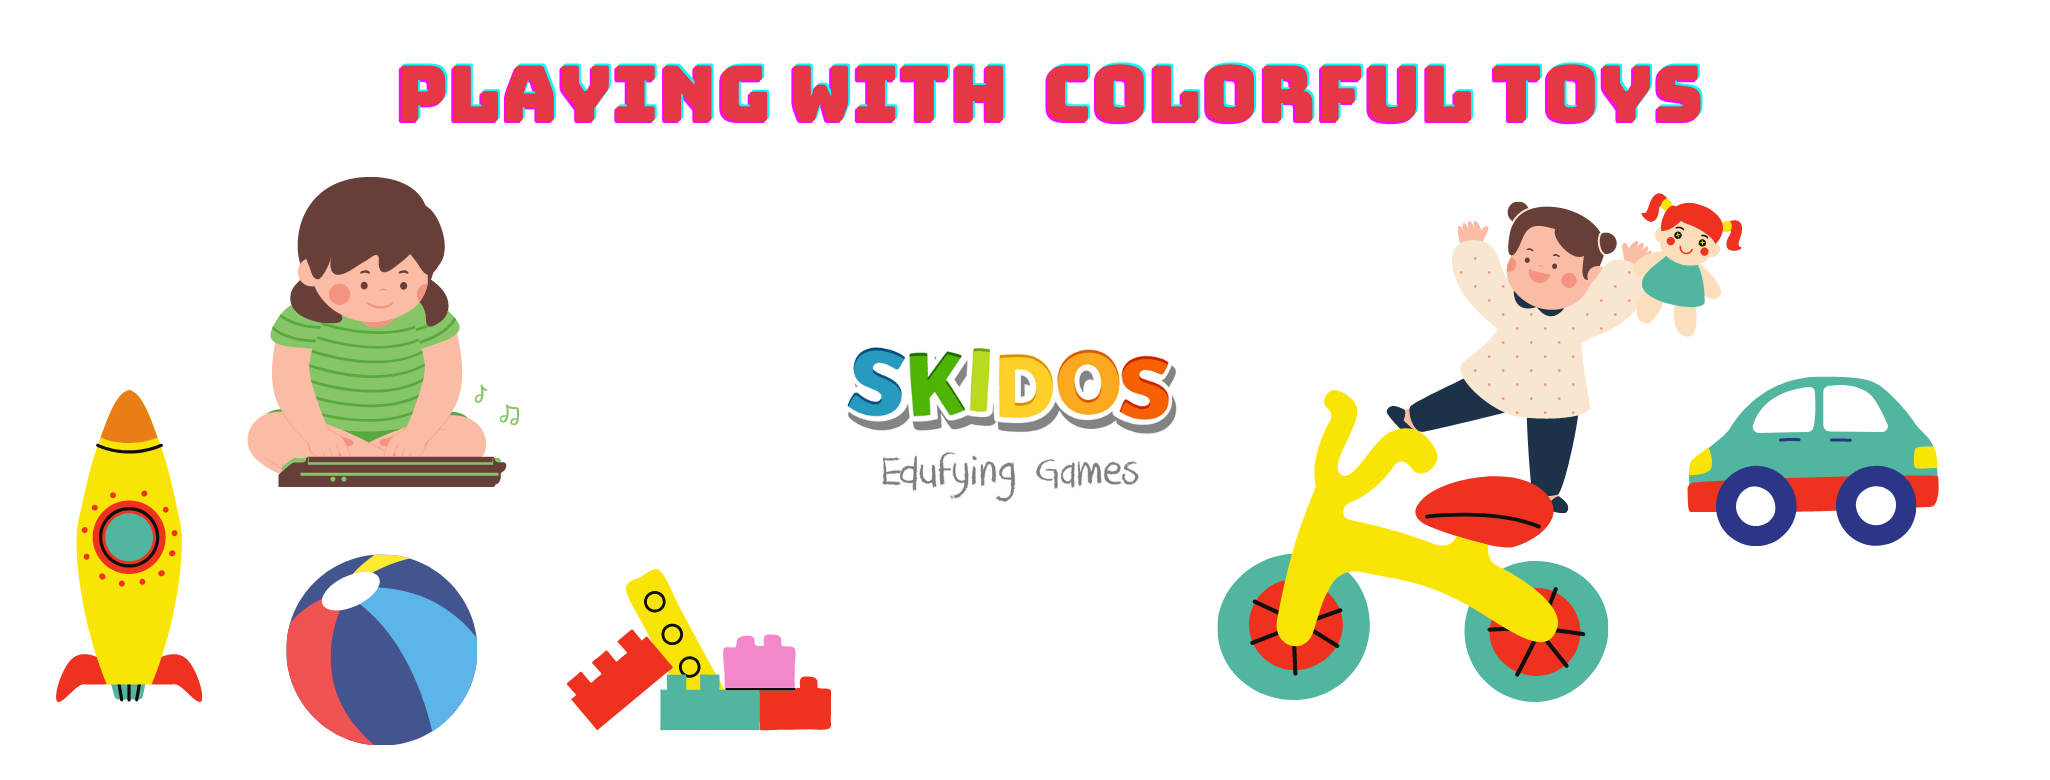 Play with colorful toys - Color therapy for kids